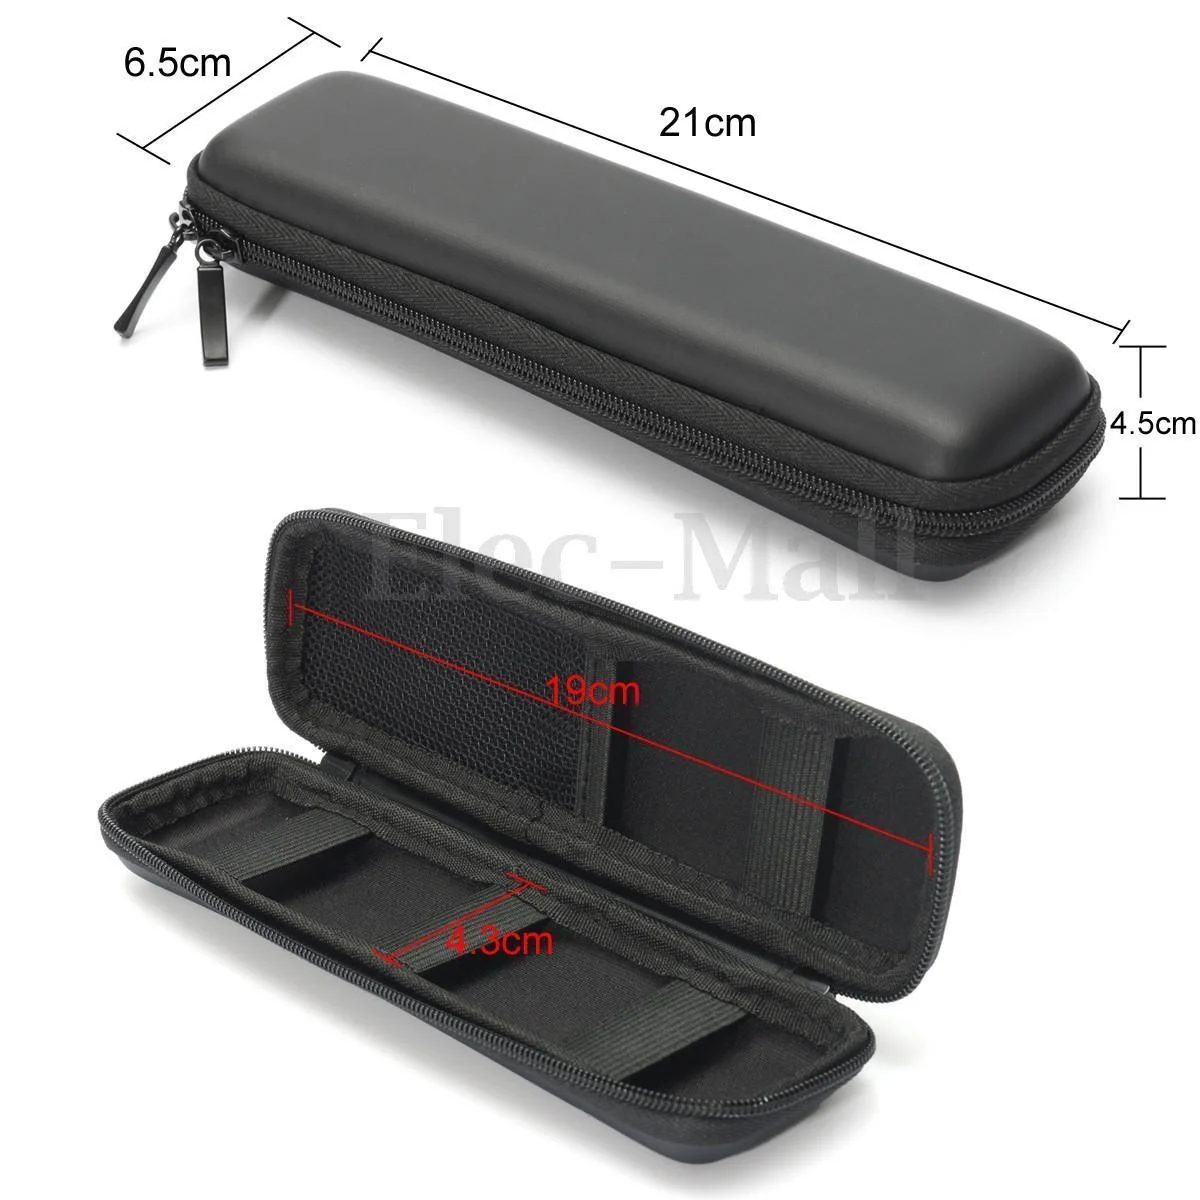 1PC Black EVA Hard Shell Stylus Pen Pencil Case Holder Protective Carrying  Box Bag Storage Container for Pen Ballpoint Pen Stylu